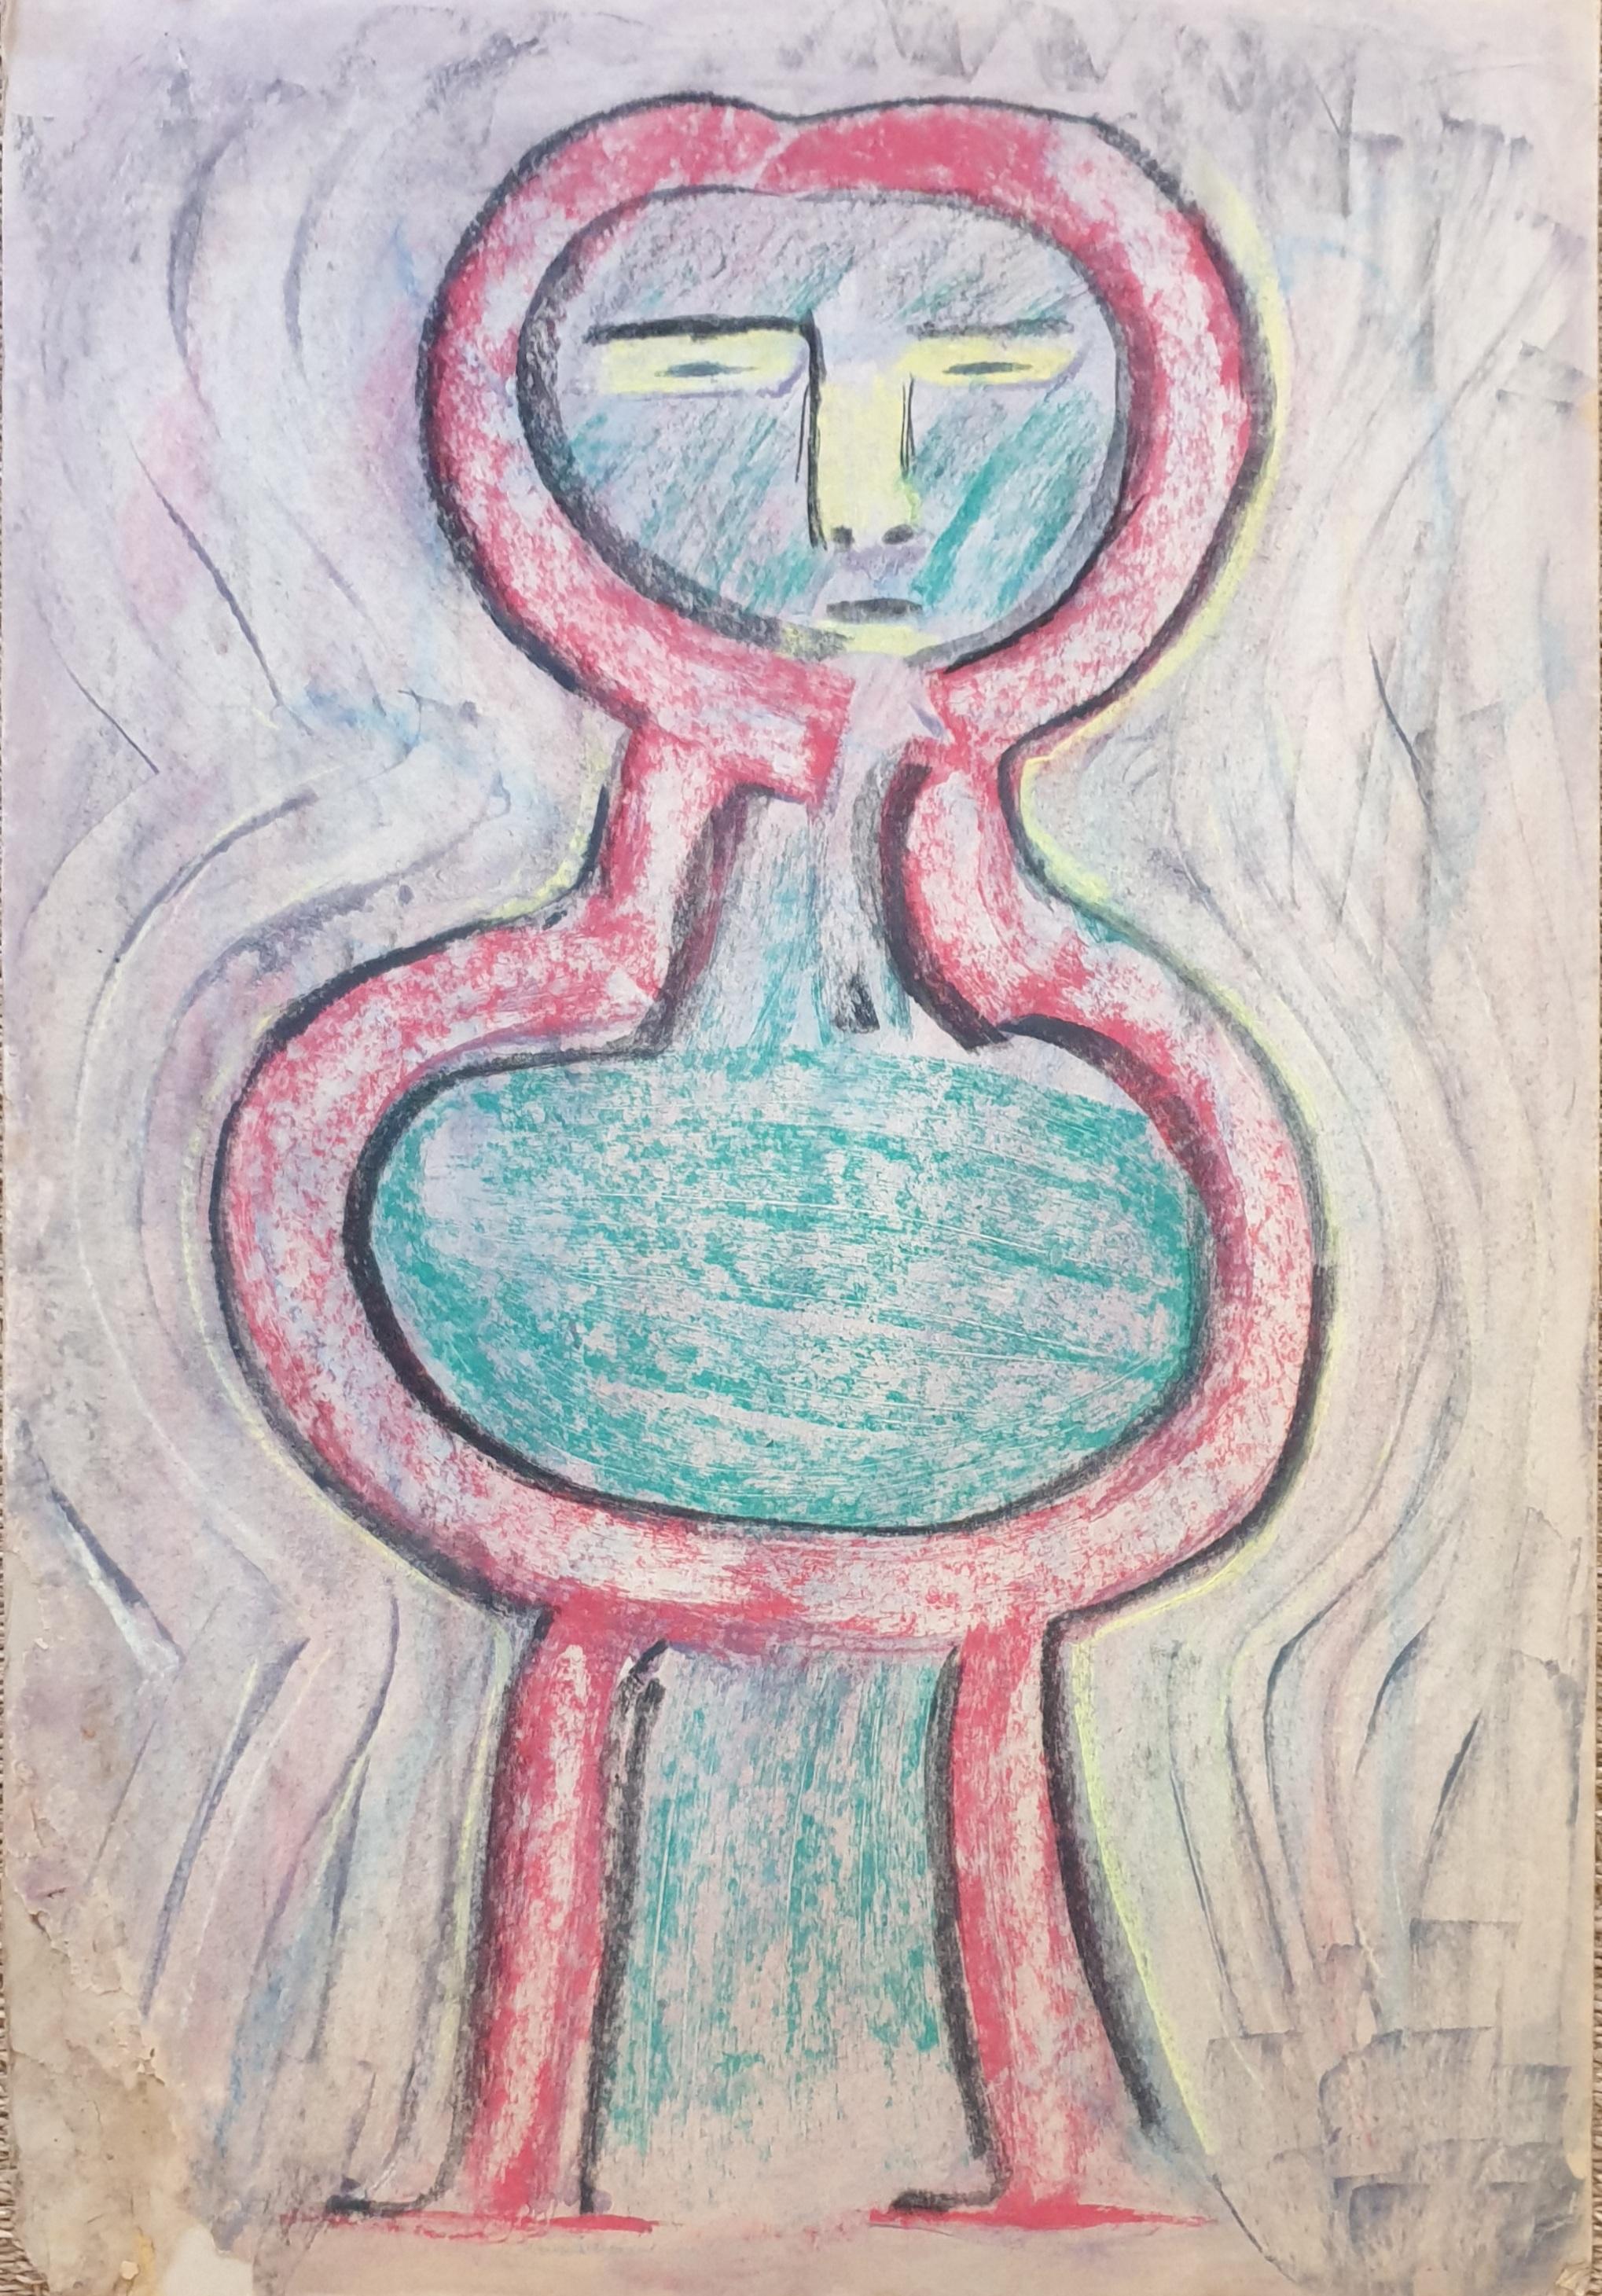 A Nuchy Figurative Art - Abstract Expressionist CoBrA Style Figure. Chalk on Card.